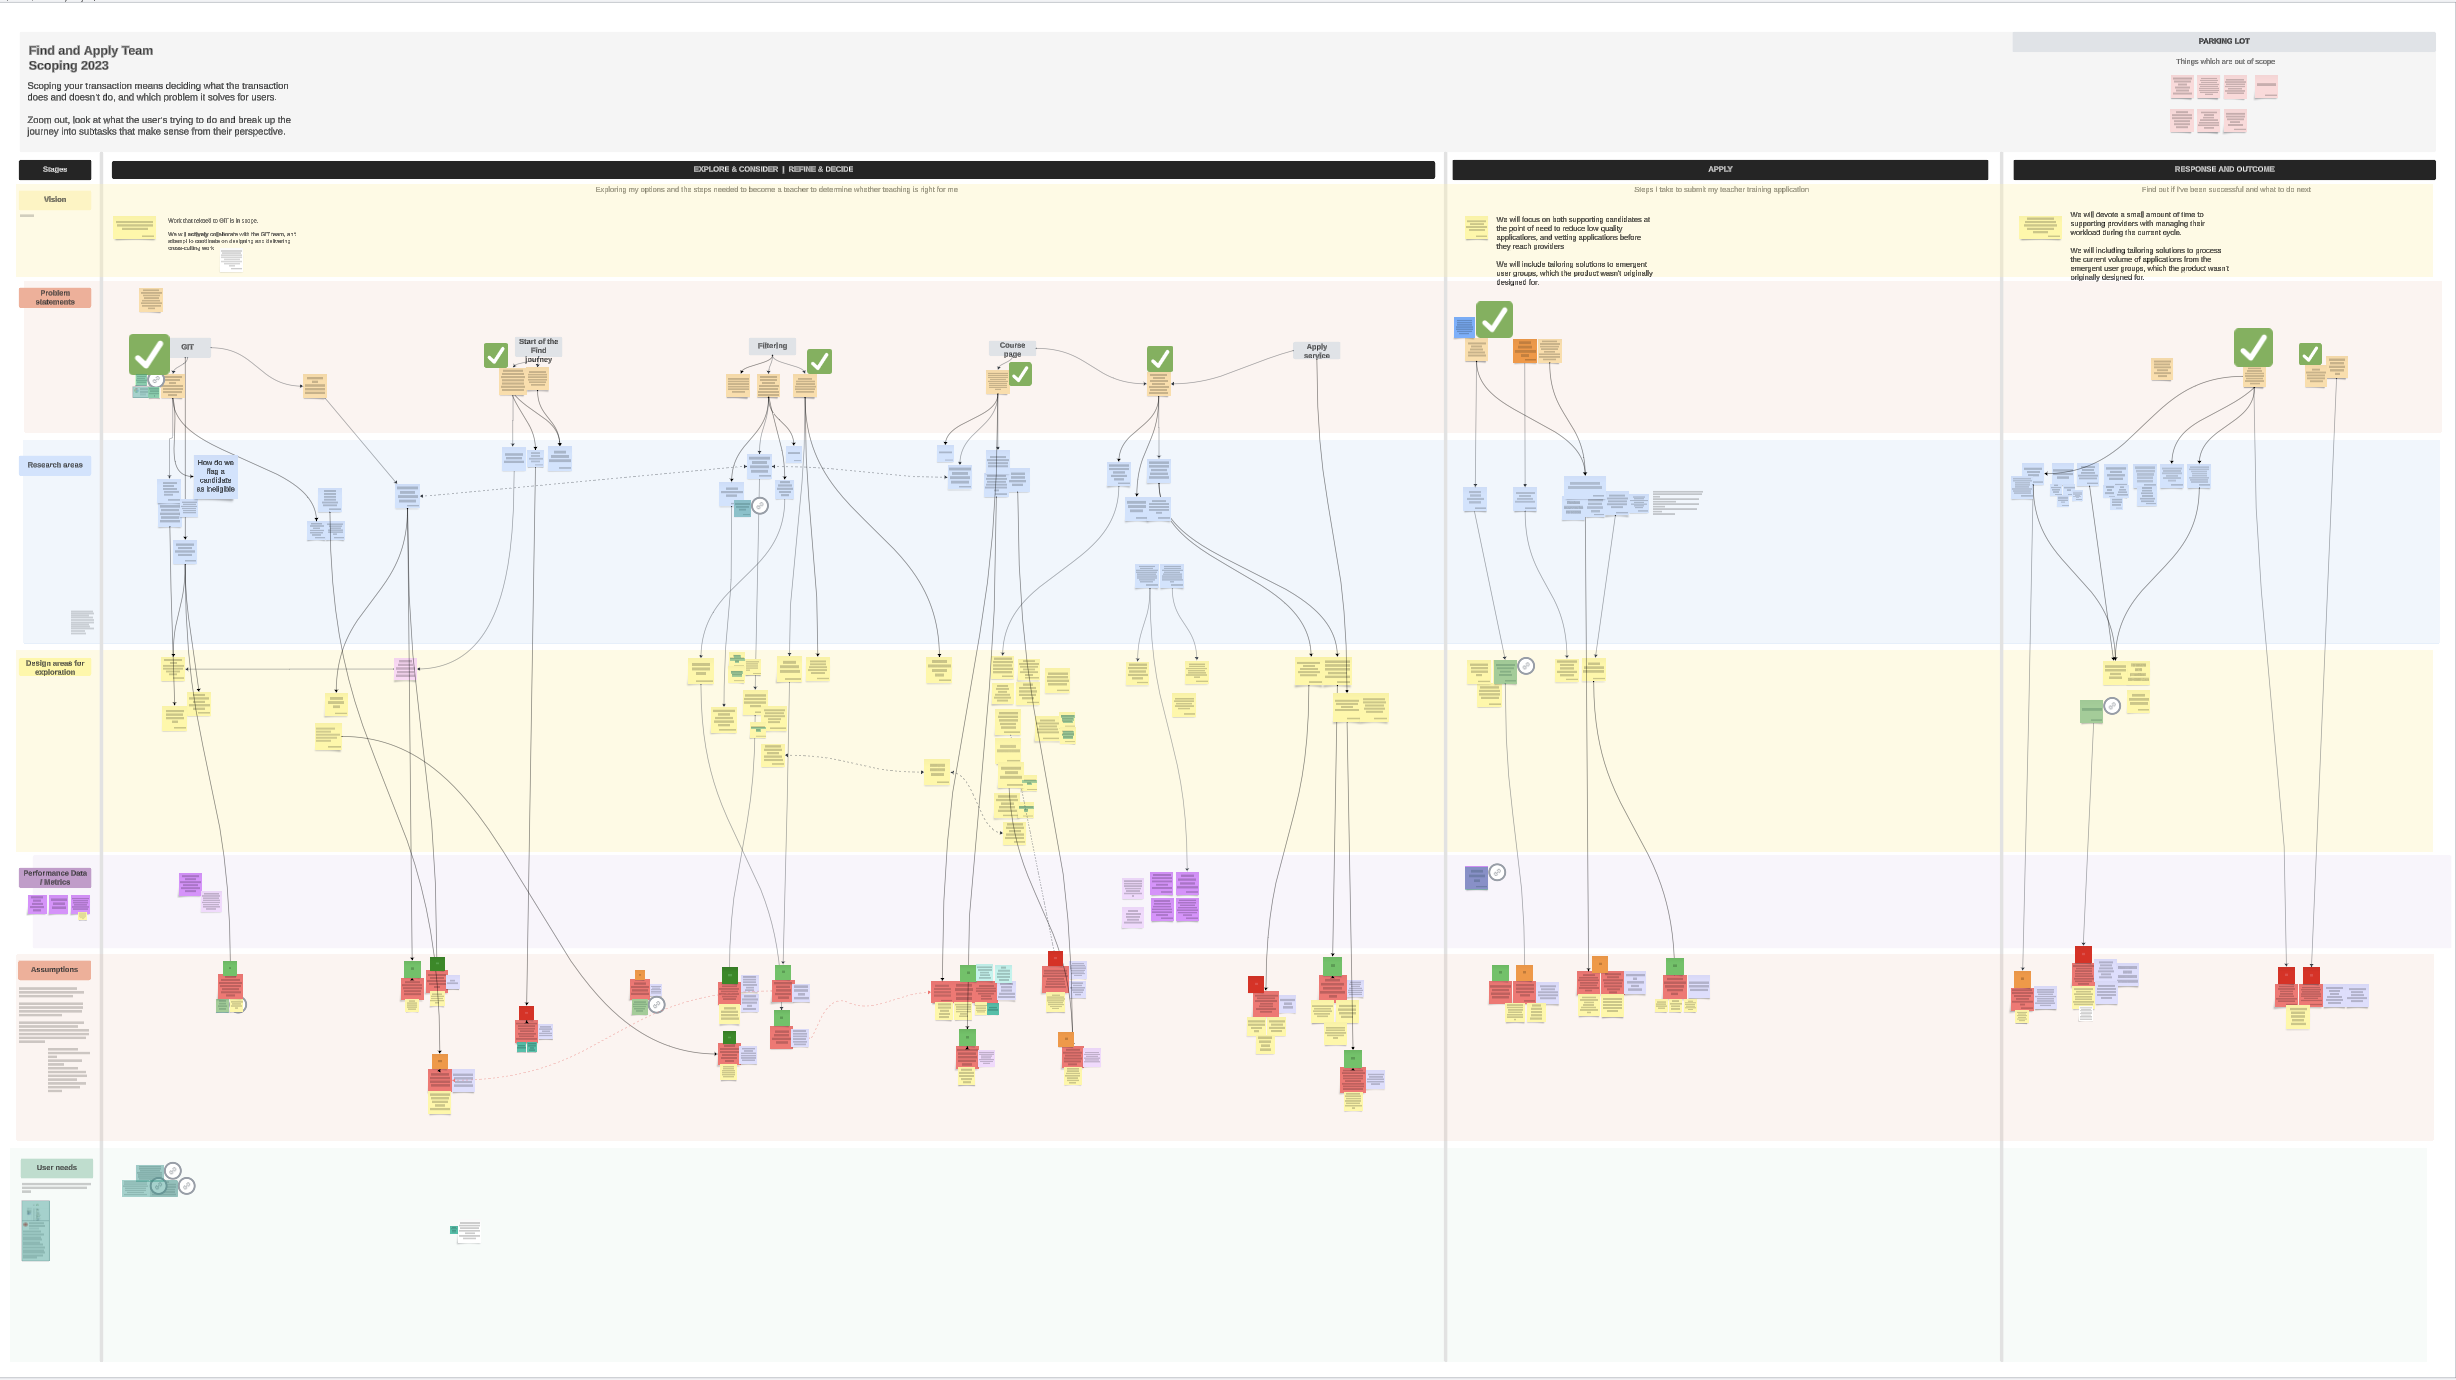 Screenshot of key stages in the candidates journey with problem statements and assumptions mapped along the journey